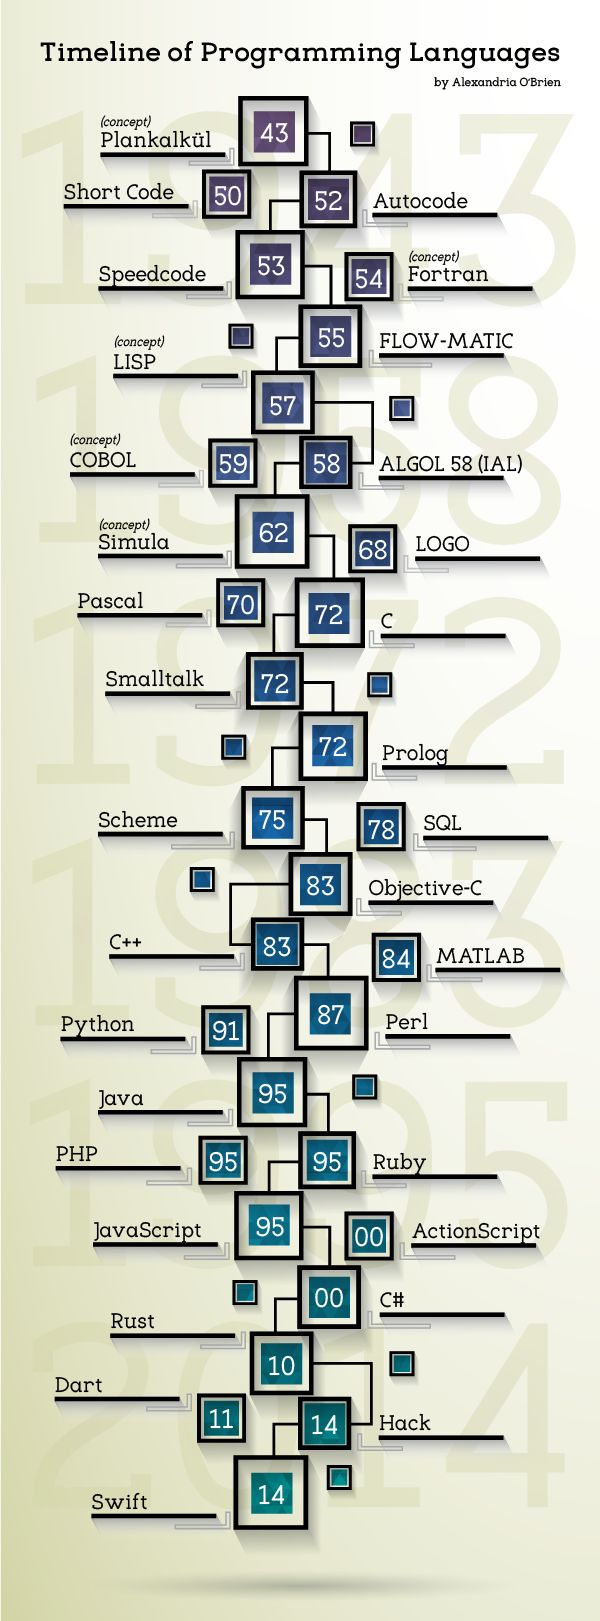 Timeline of the programming languages